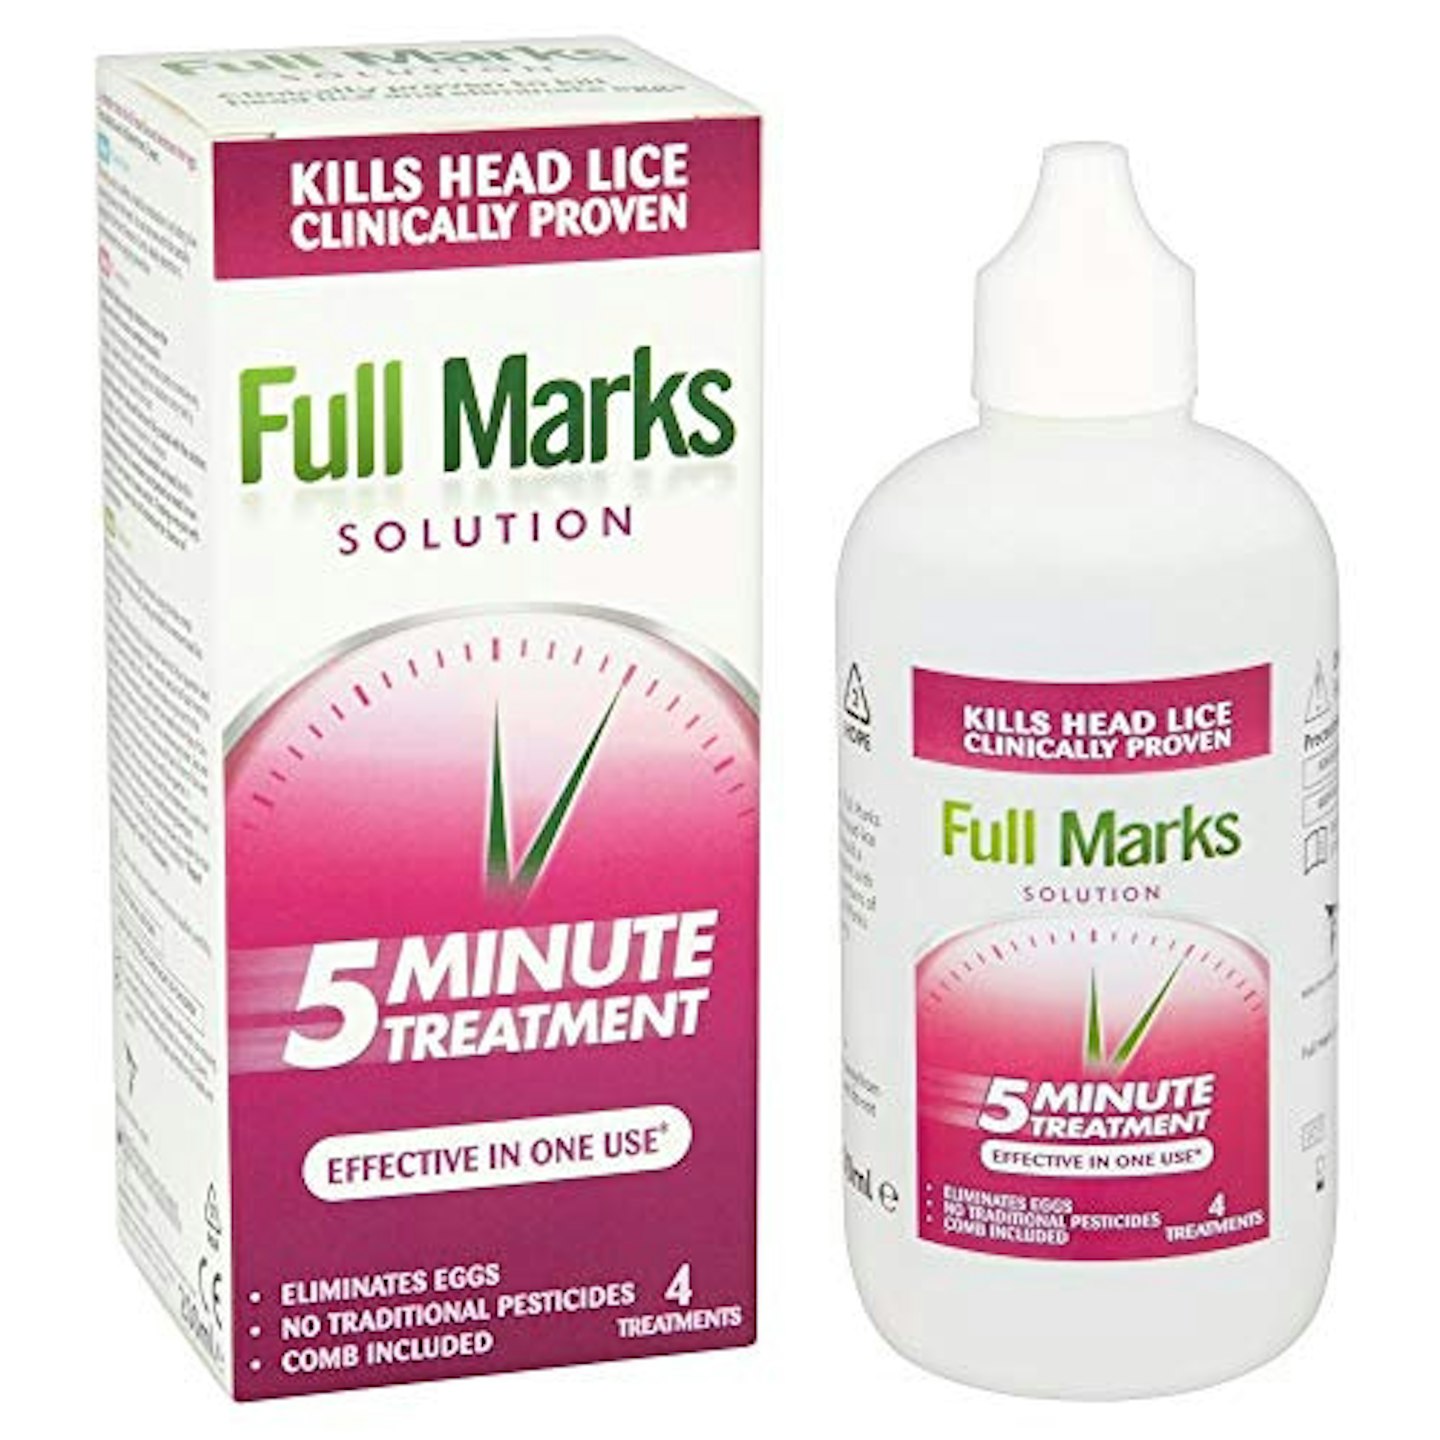 best-head-lice-treatments-and-products-full-marks-solution